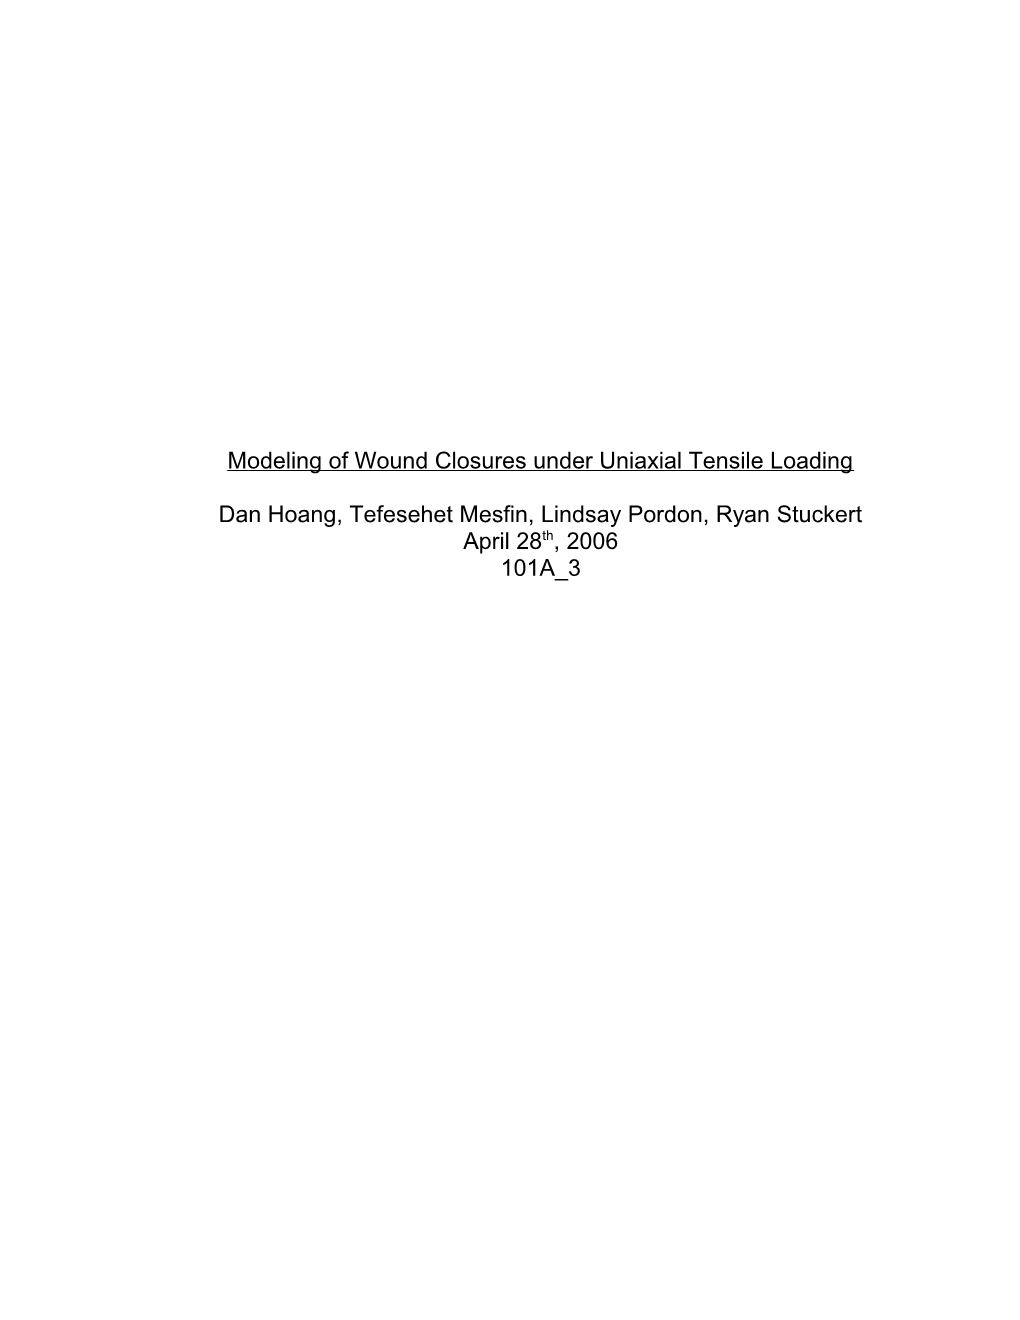 Modeling of Wound Closures Under Uniaxial Tensile Loading